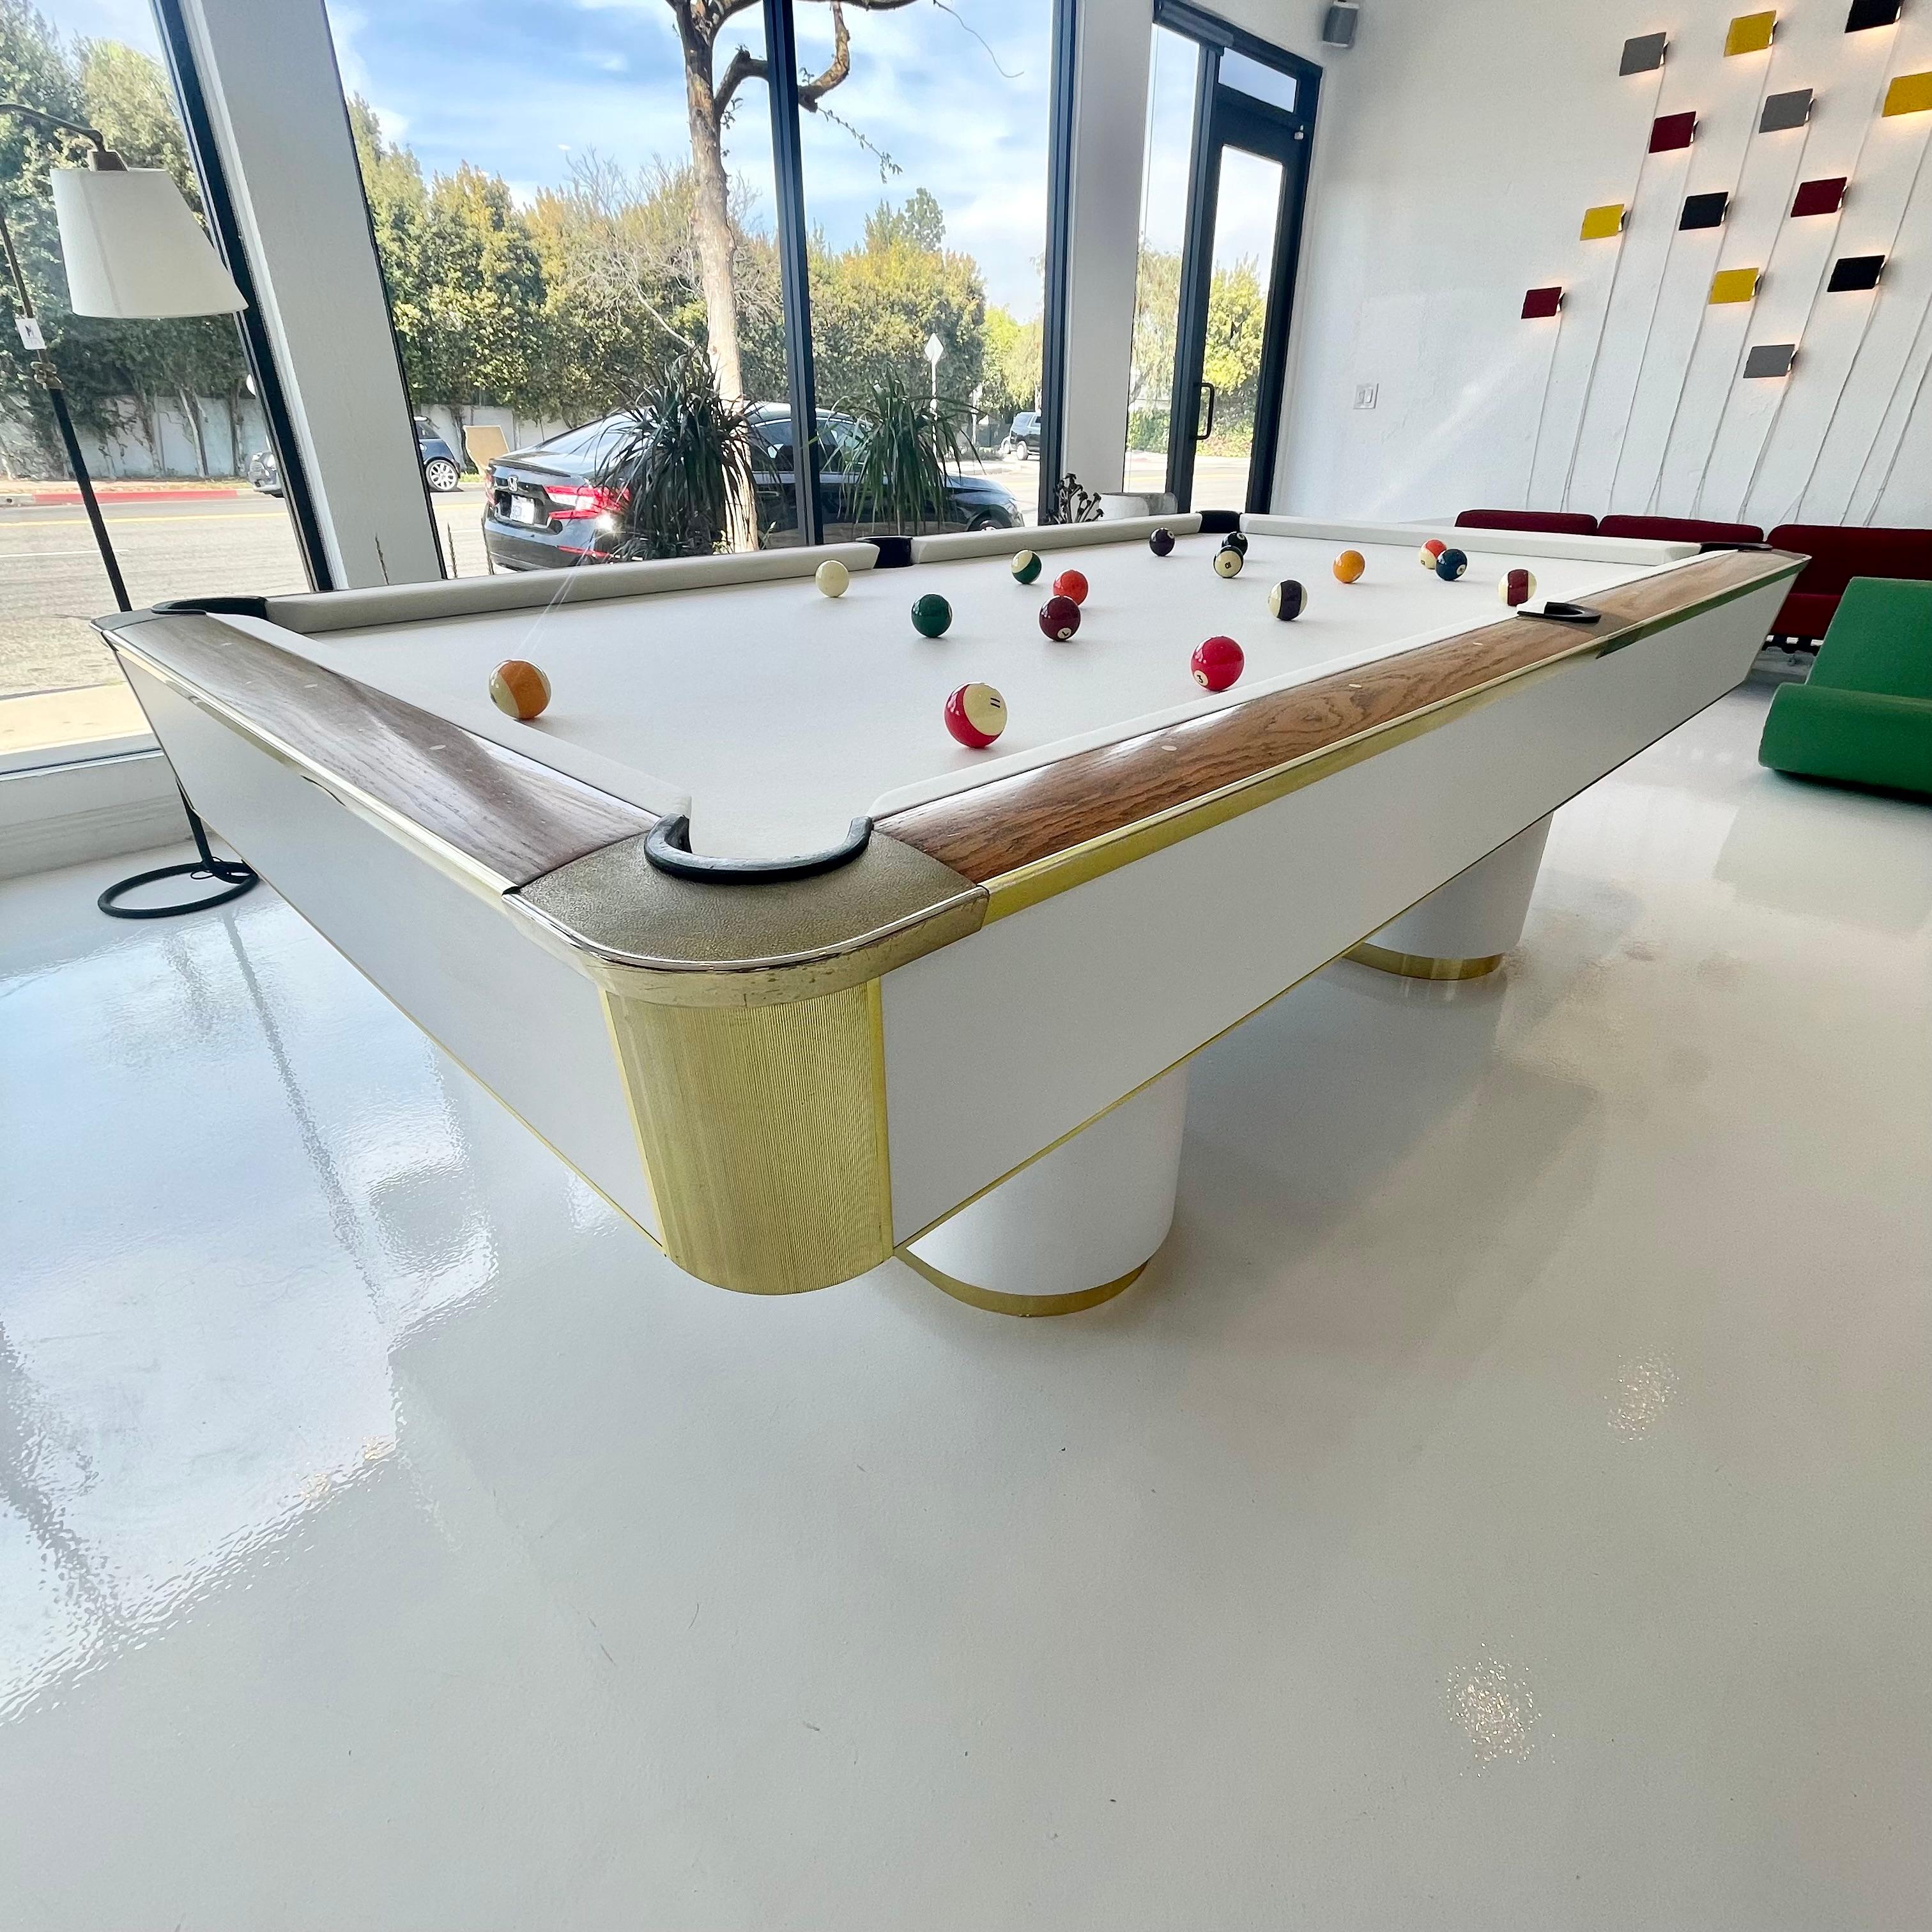 1980s Brass and Formica Murrey Pool Table 1